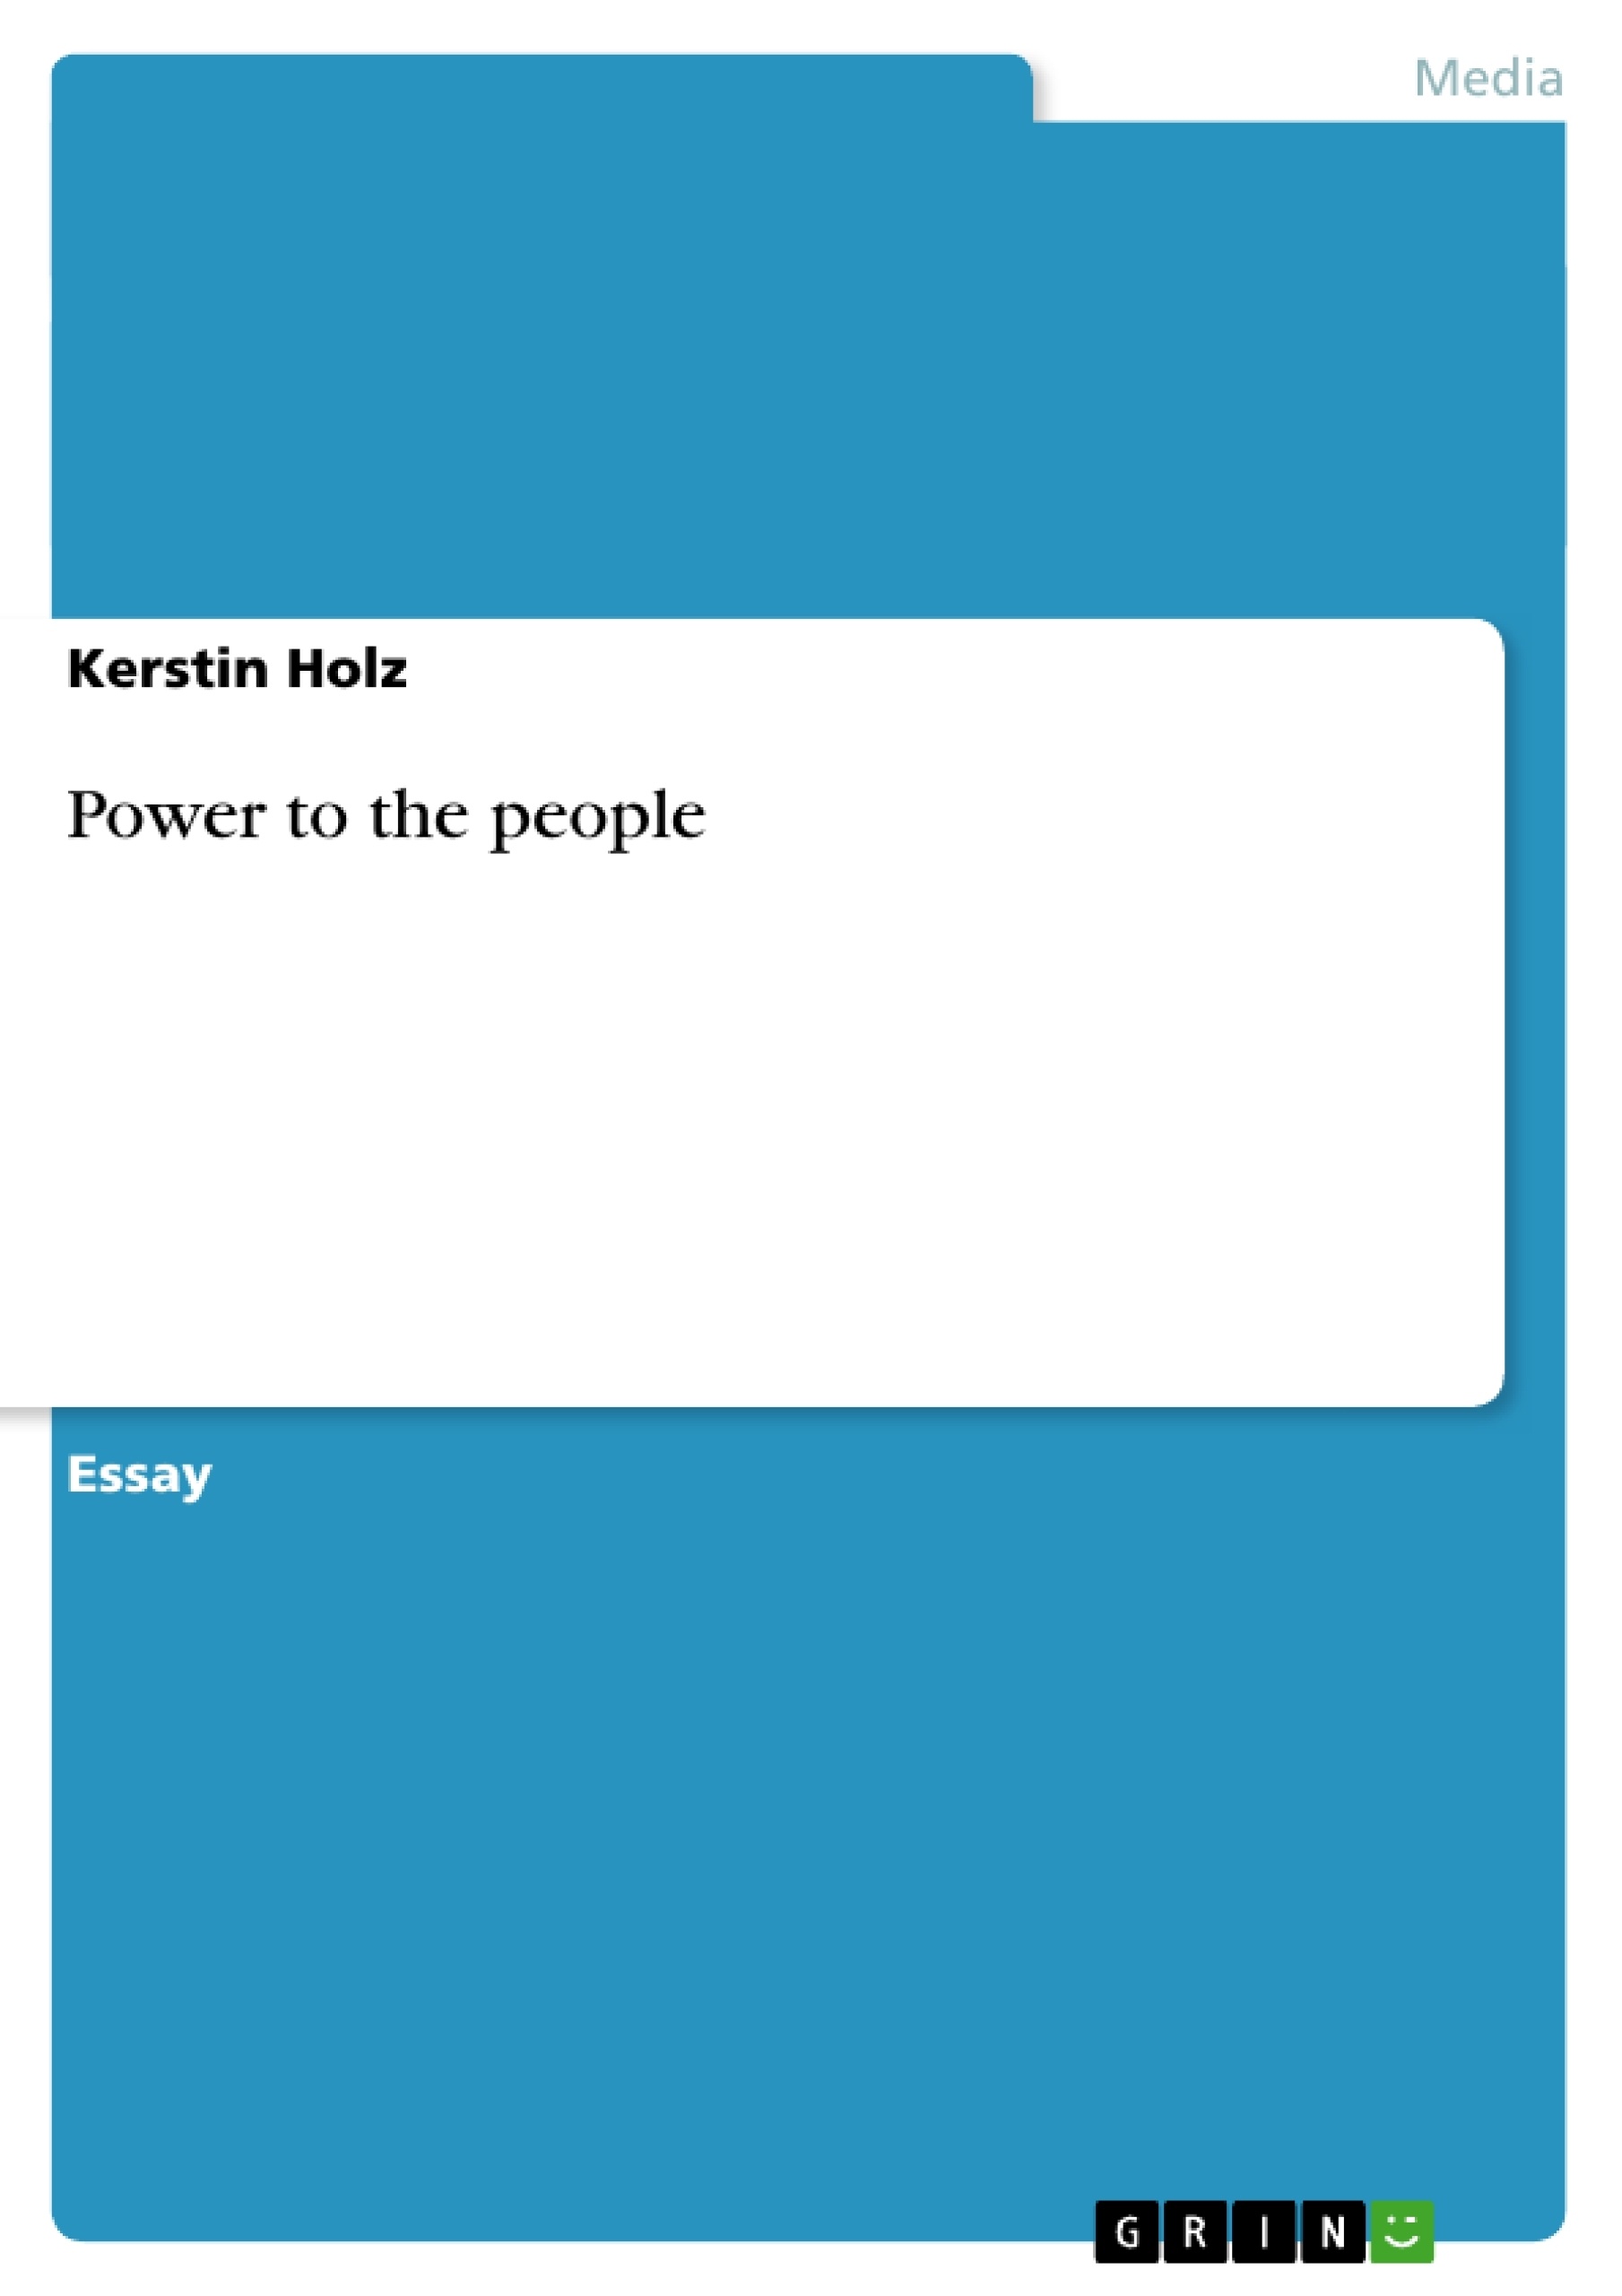 Title: Power to the people